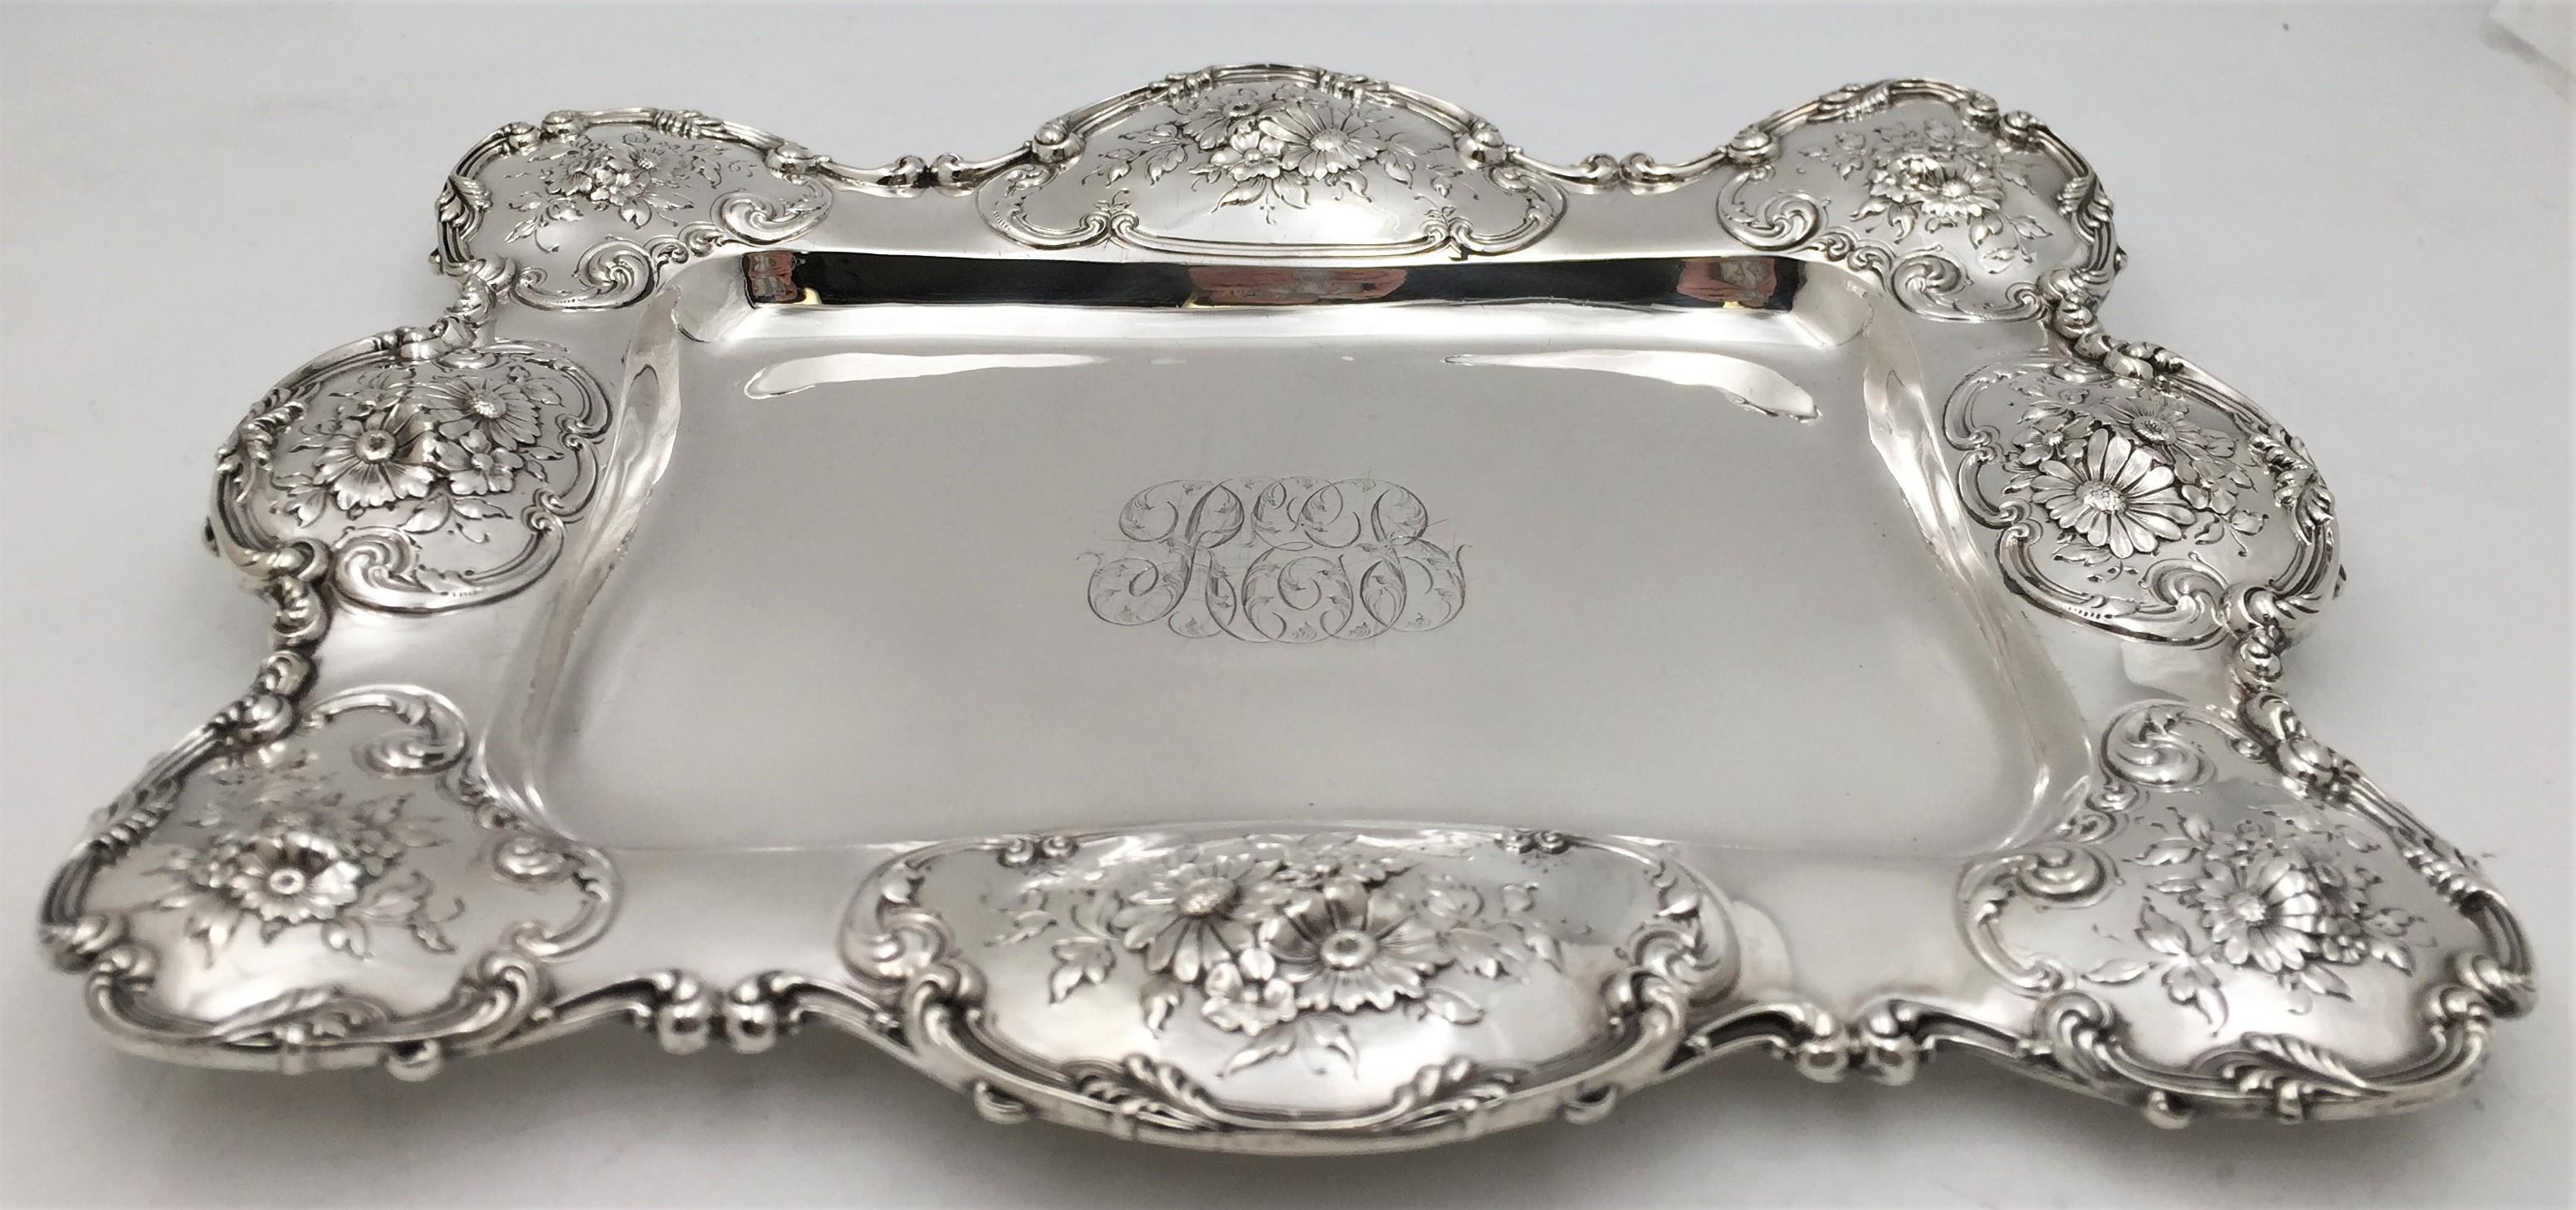 Theodore B. Starr sterling silver asparagus serving dish or platter in Art Nouveau style with raised floral motifs in cartouches. It measures 14 1/2'' in length by 11 3/4'' in width by 1 1/3'' in height, weighs 30.6 troy ounces, and bears hallmarks